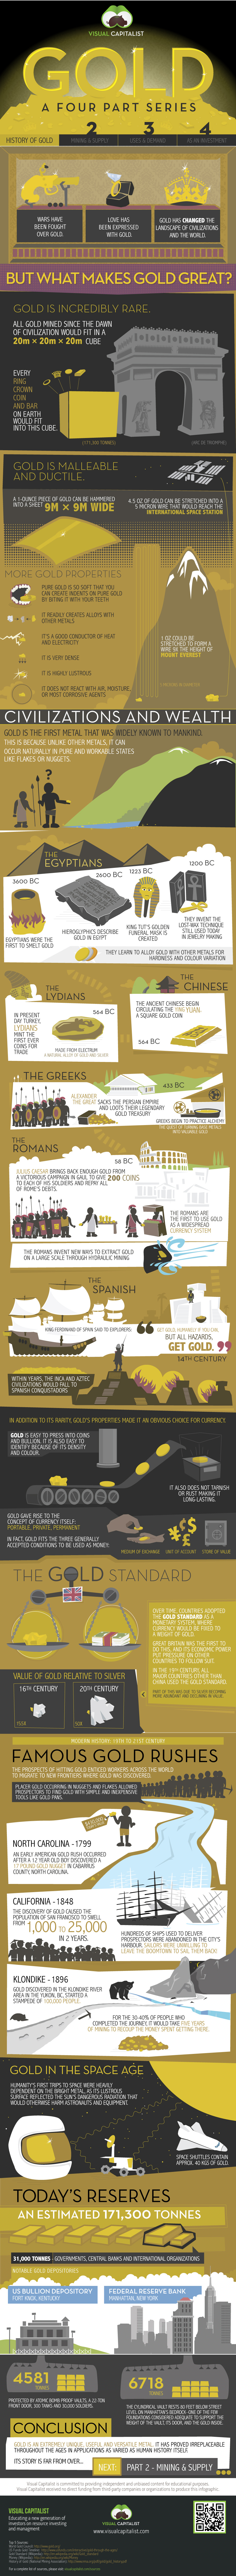 The History of Gold as a Precious Metal